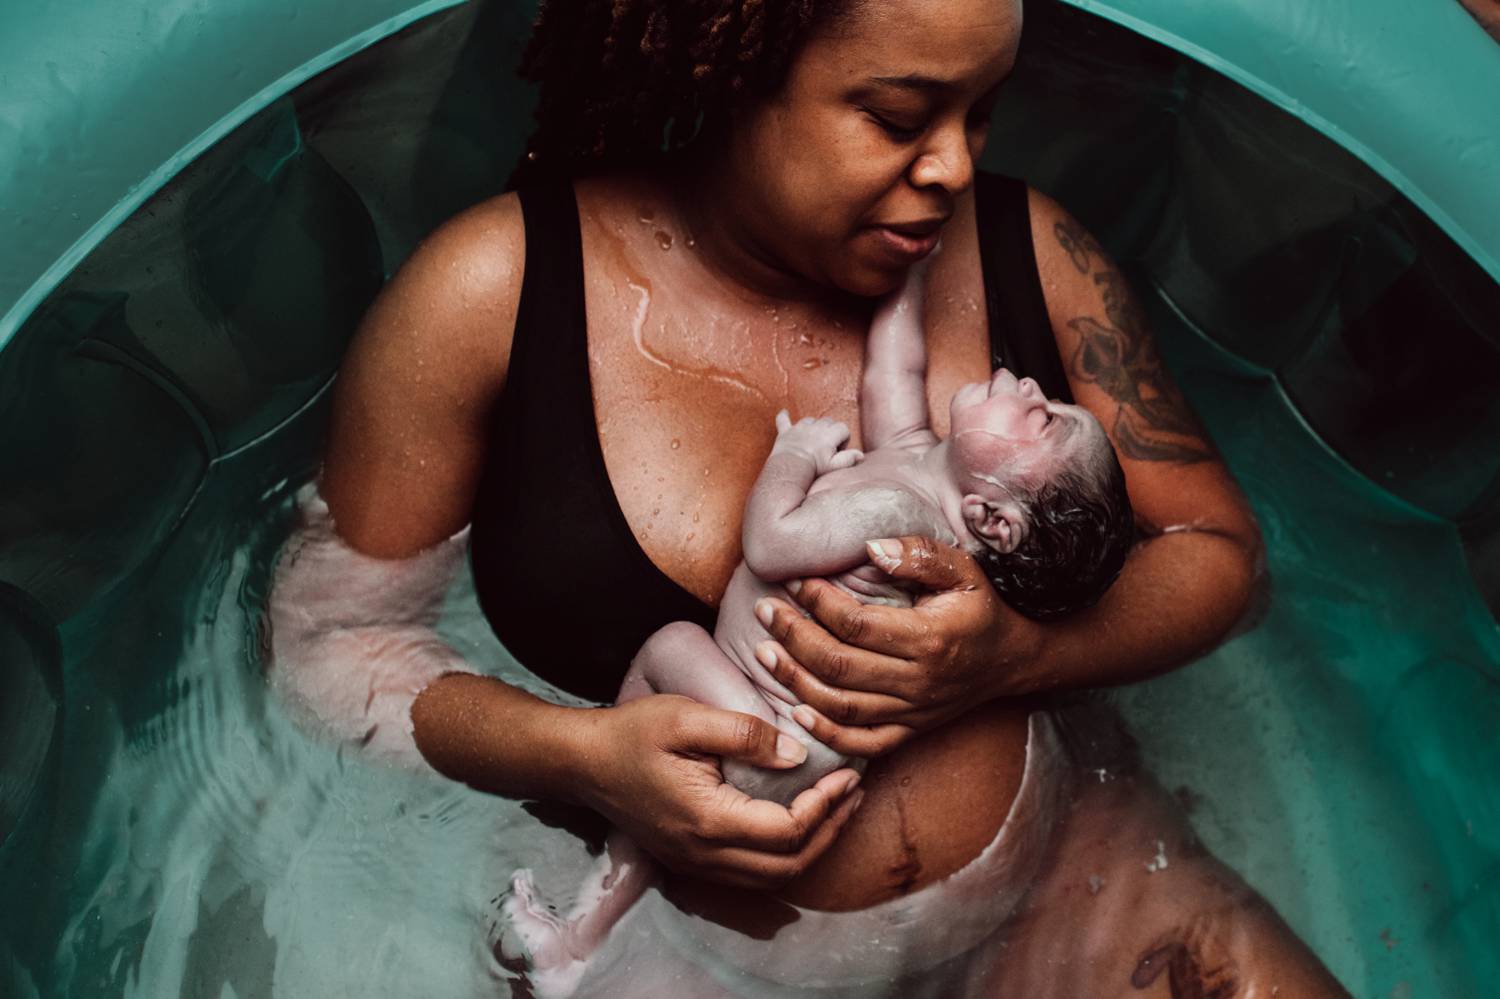 A new mother reclines in an inflatable bath holding her newborn baby against her chest